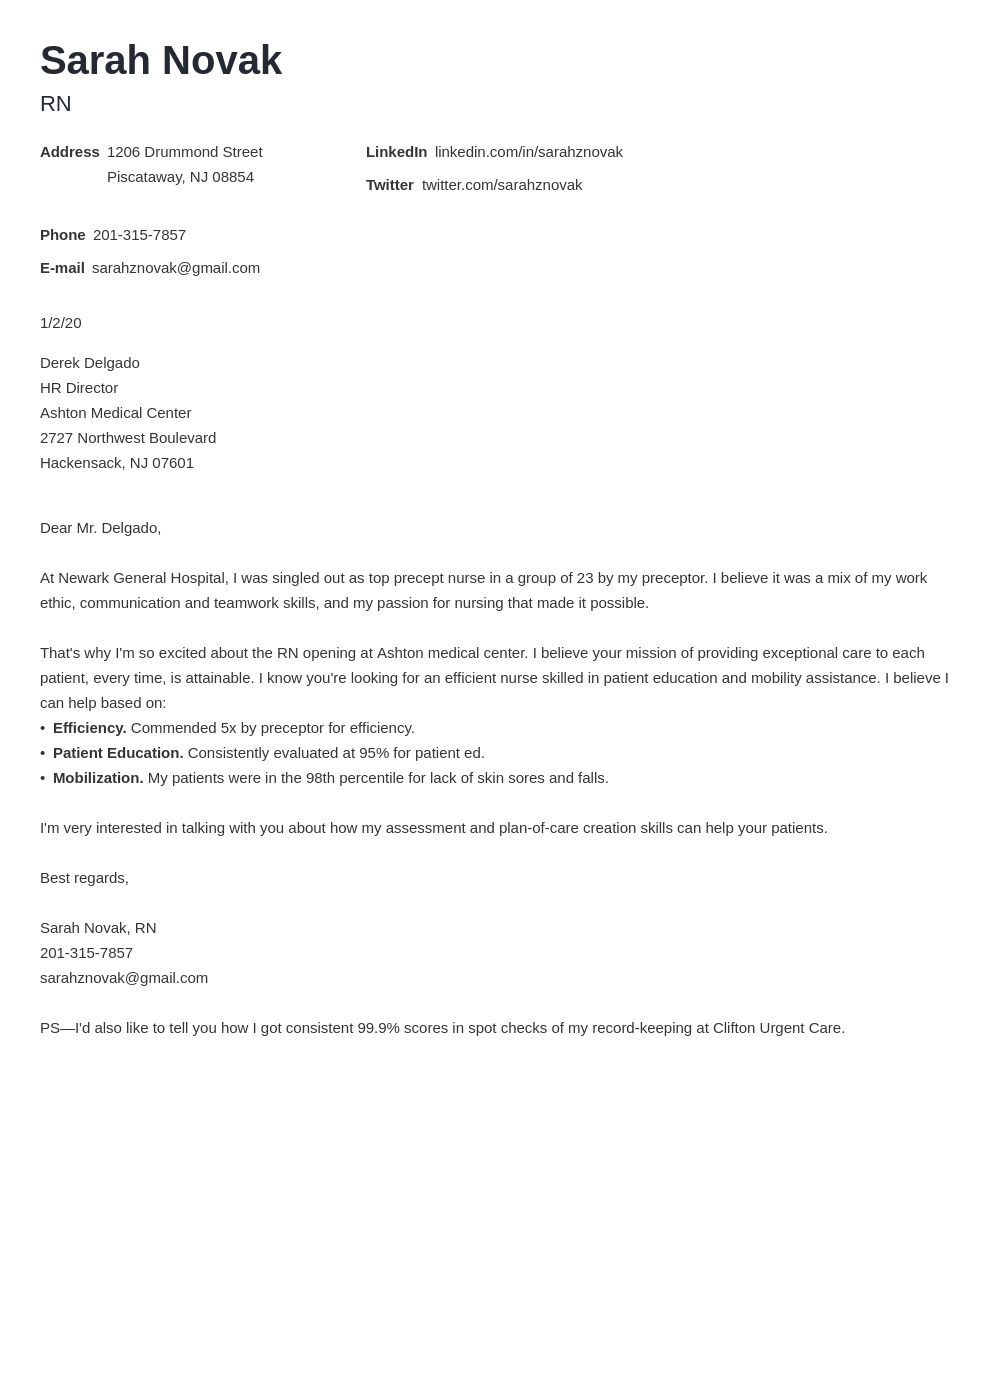 student cover letter no experience